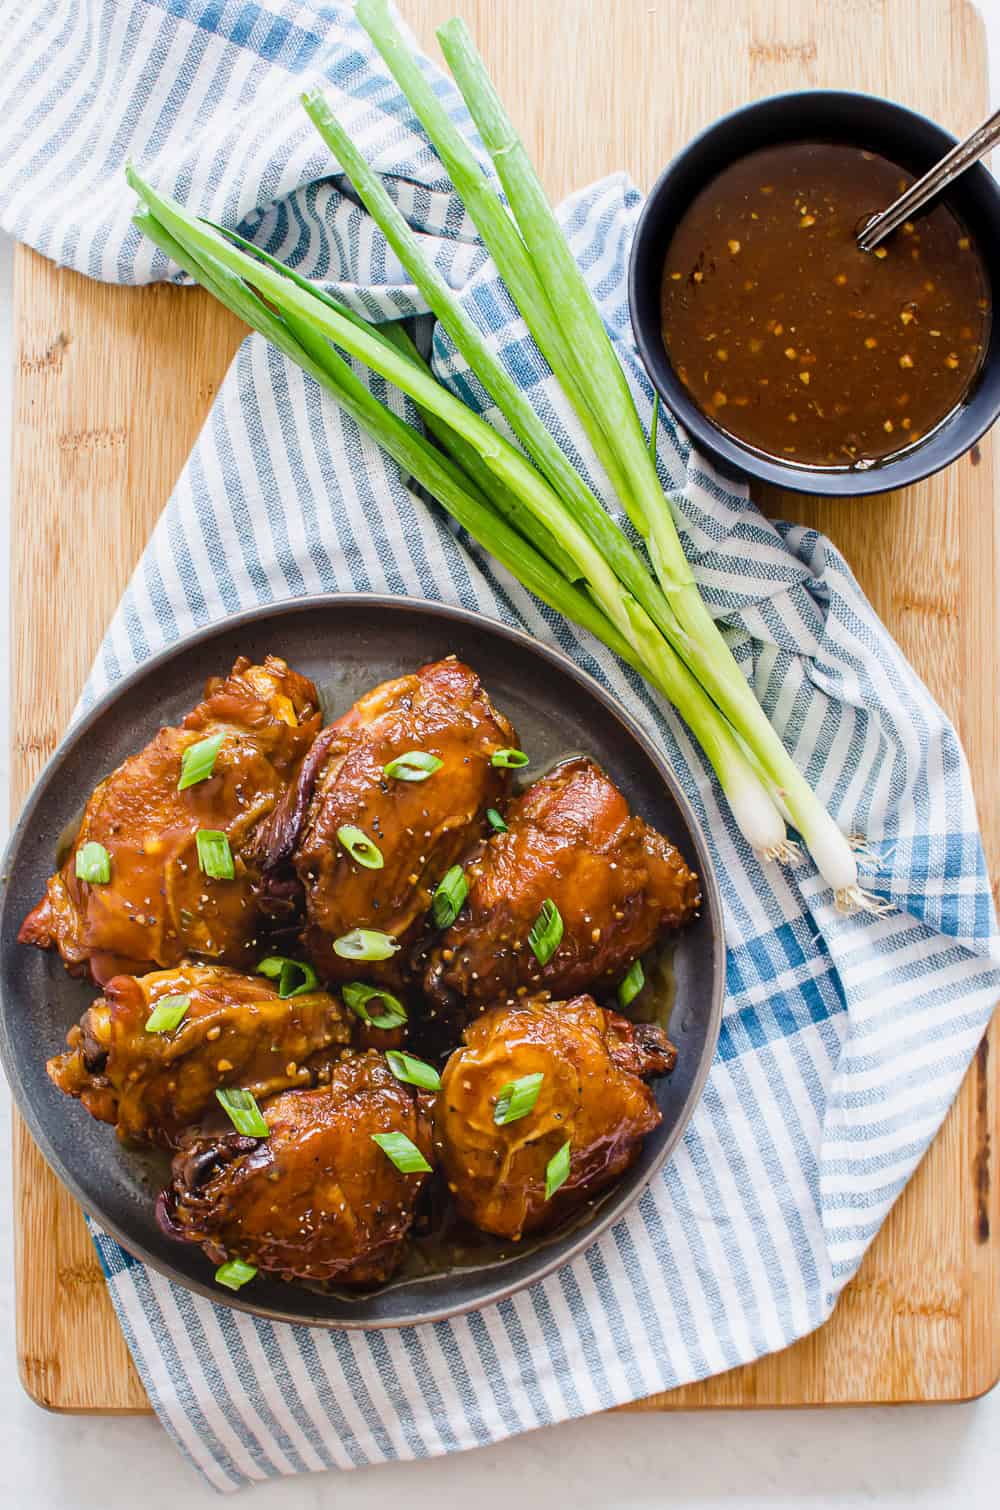 Teriyaki chicken thighs on a plate topped with green onion.